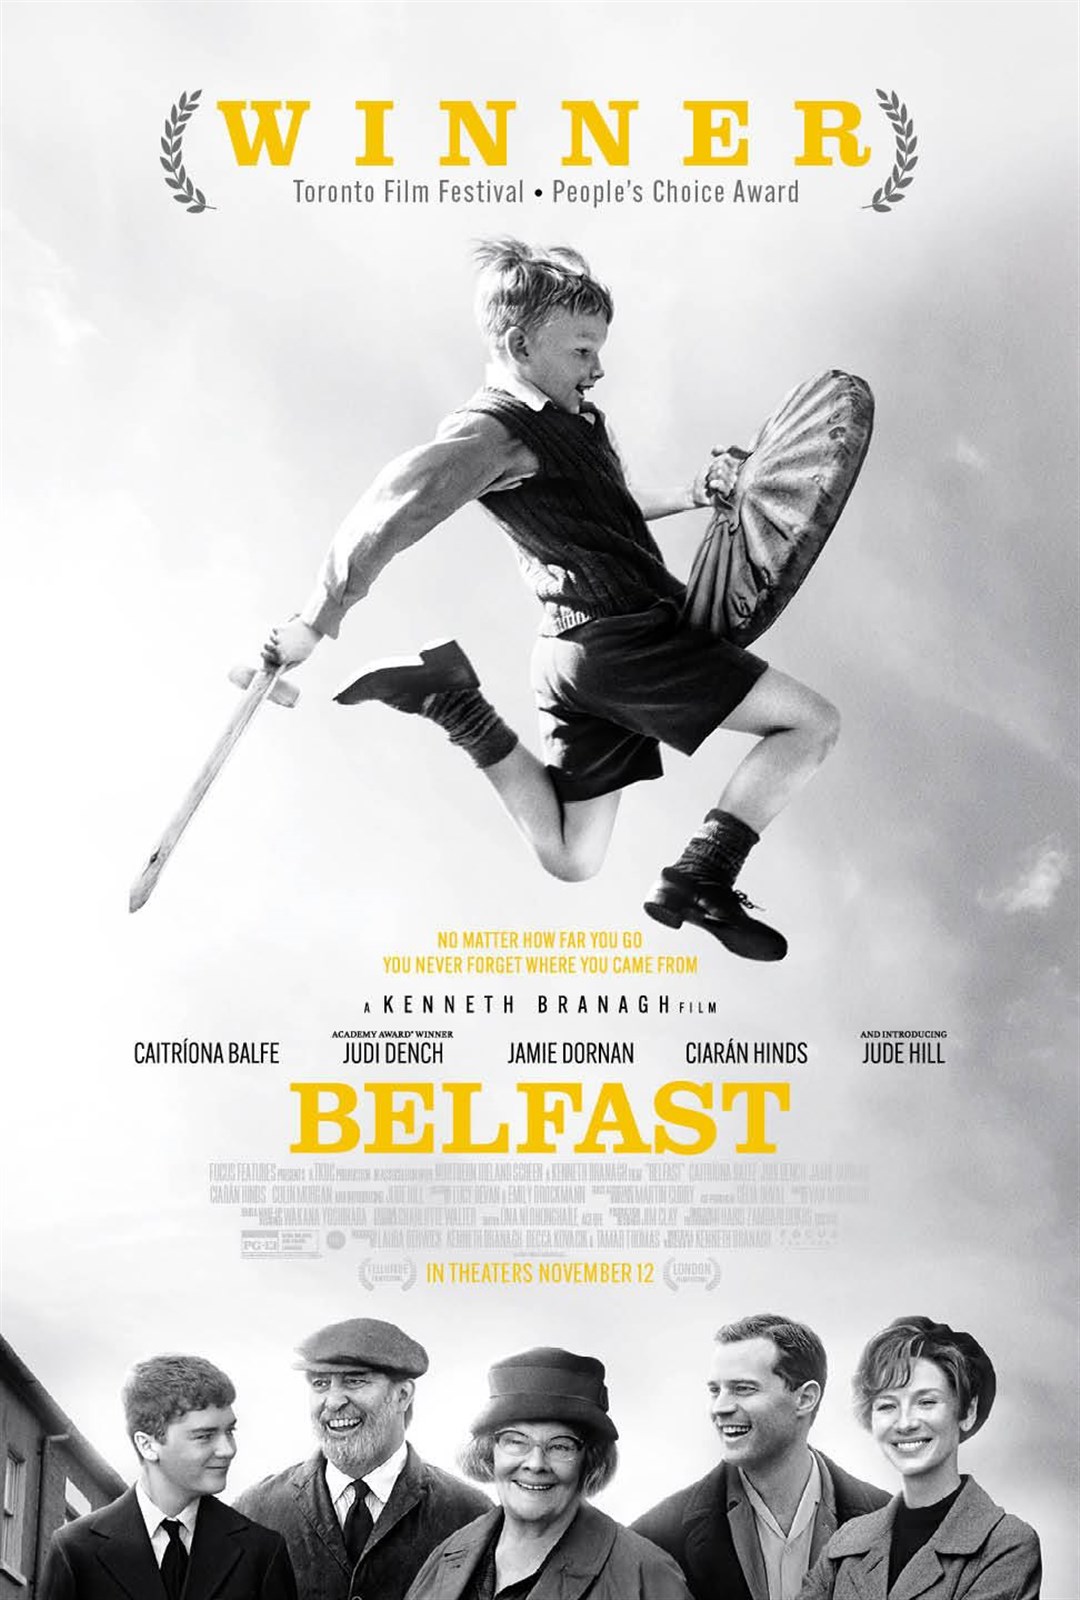 Belfast, currently a wow on Netflix, rates highly, doubtless to the surprise of some though there is a strong romantic theme throughout.